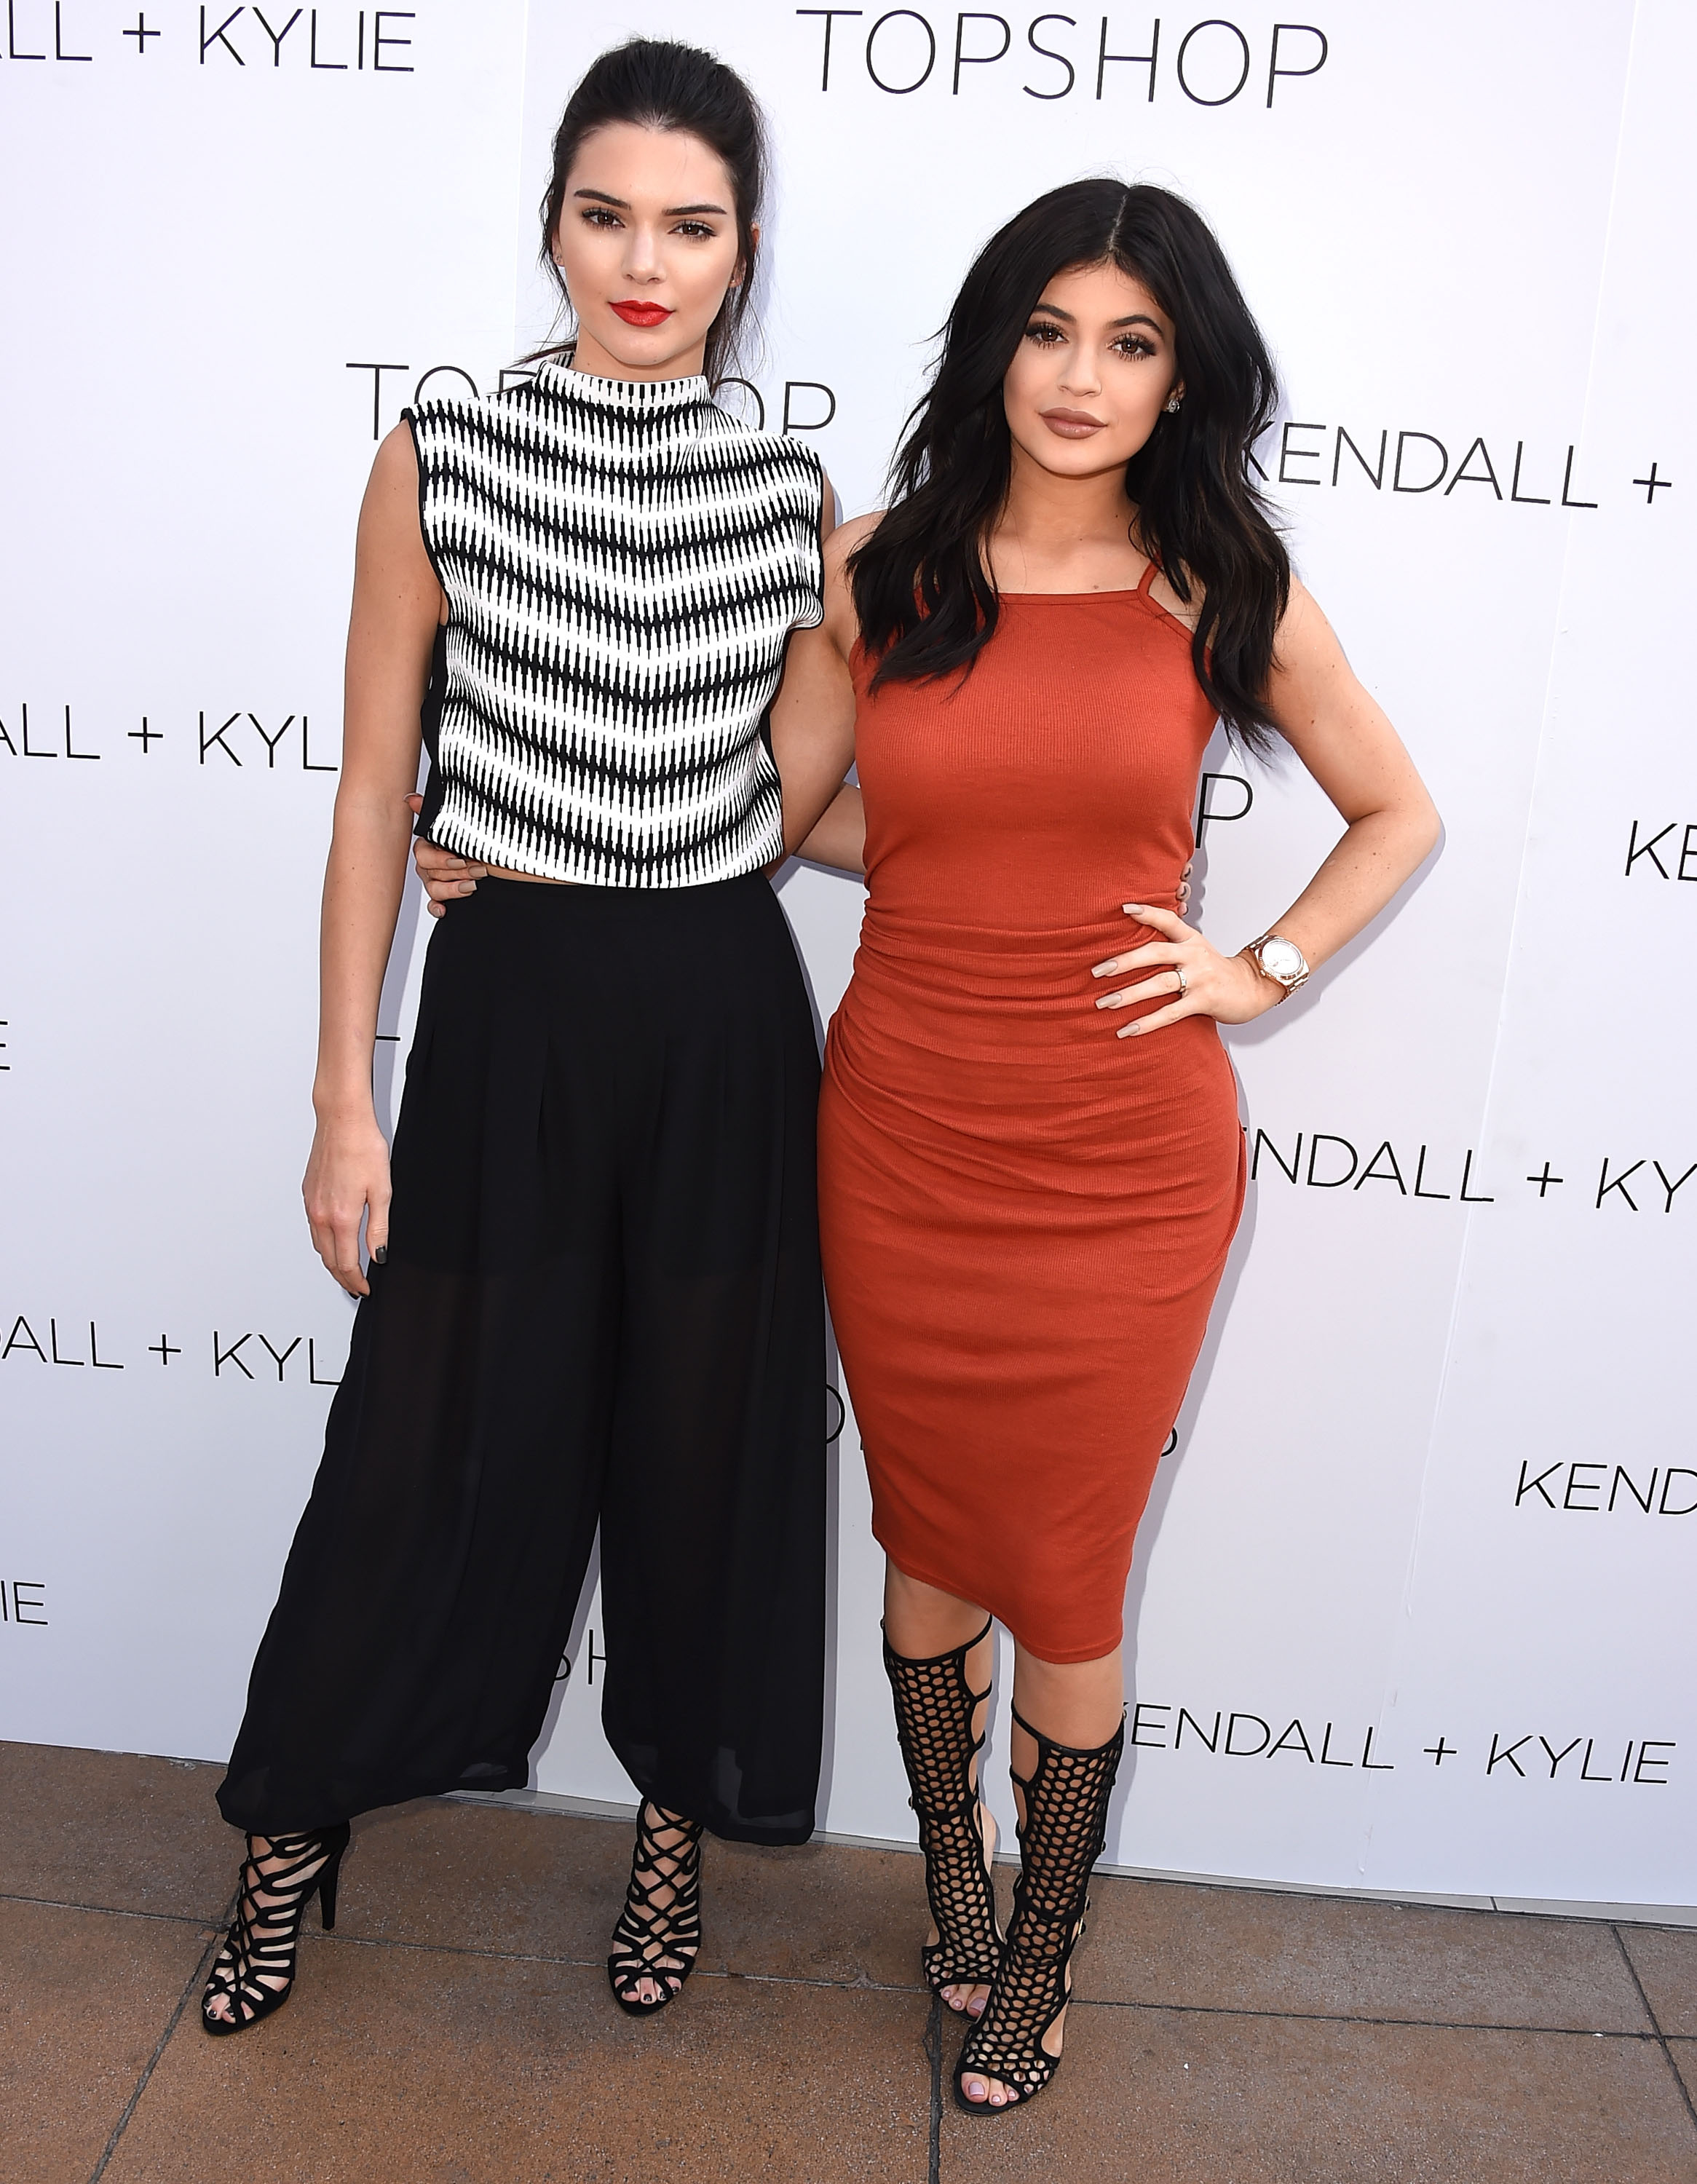 Watch Out, Kim: Kendall & Kylie Jenner Launch Mobile Game | Global Grind